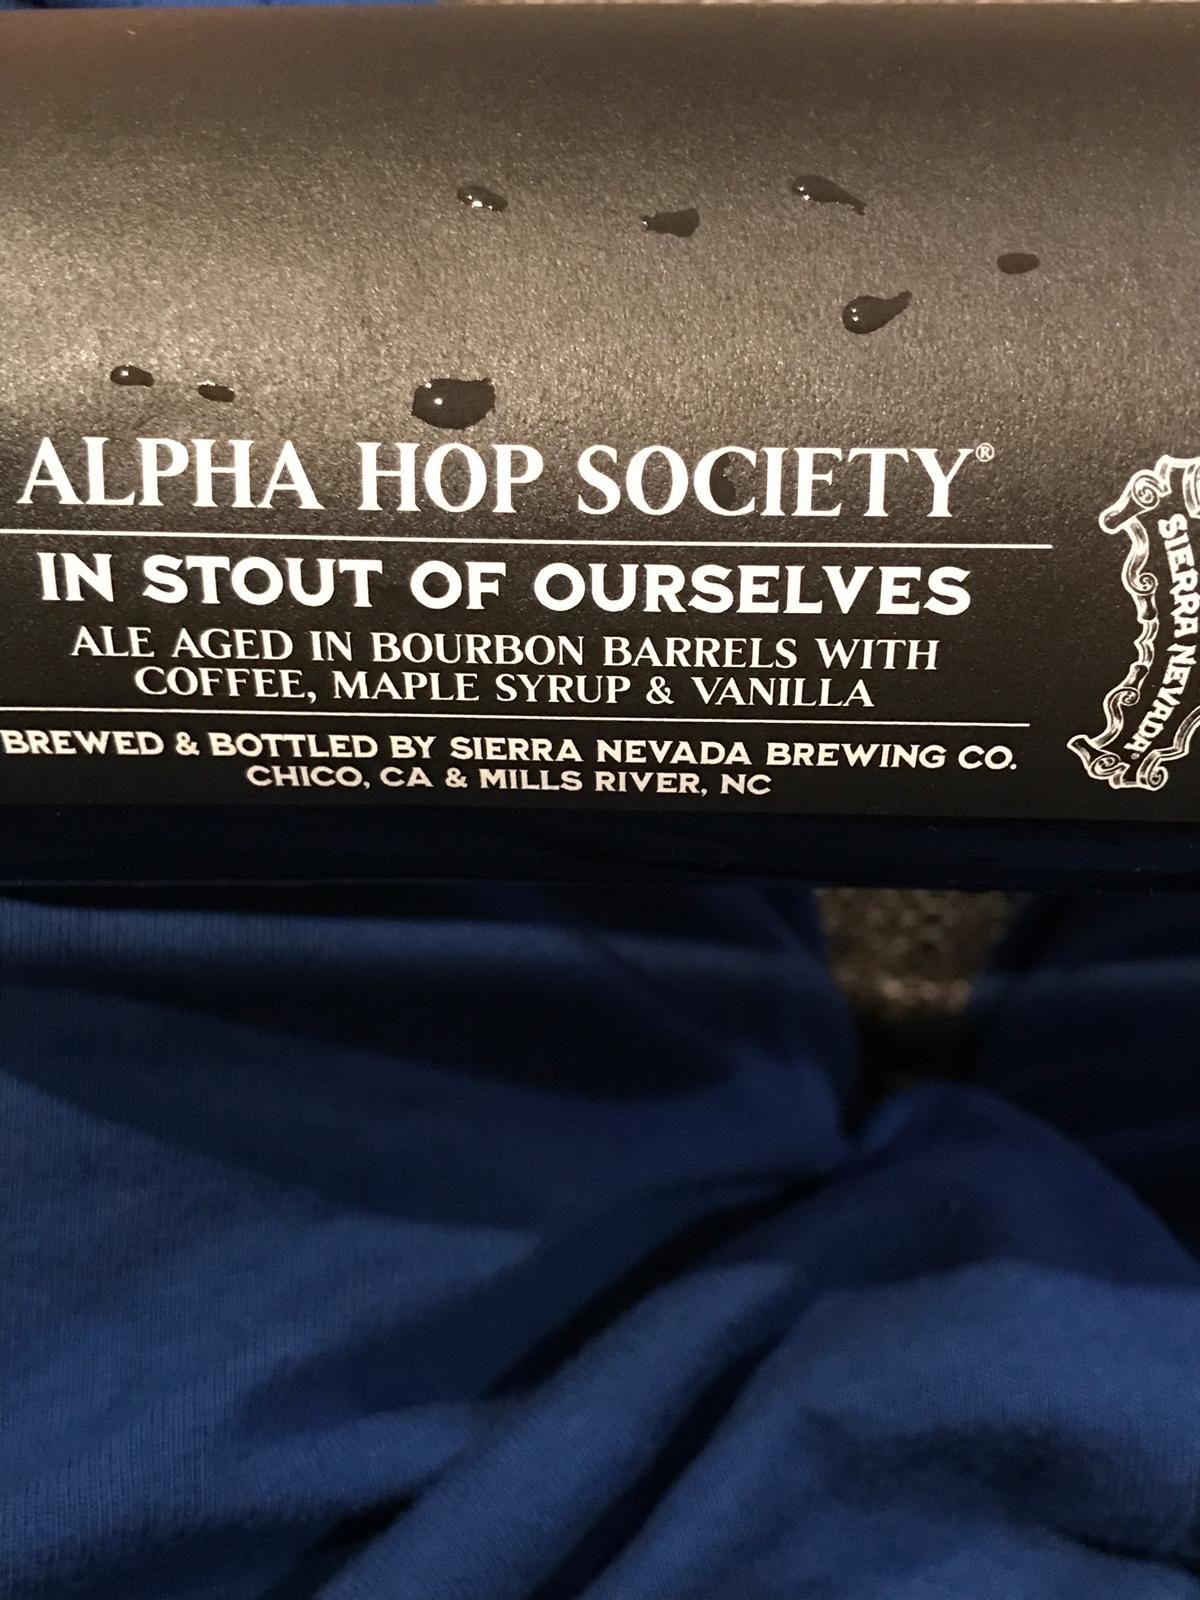 Alpha Hop Society: In Stout of Ourselves (Bourbon Barrel Aged)